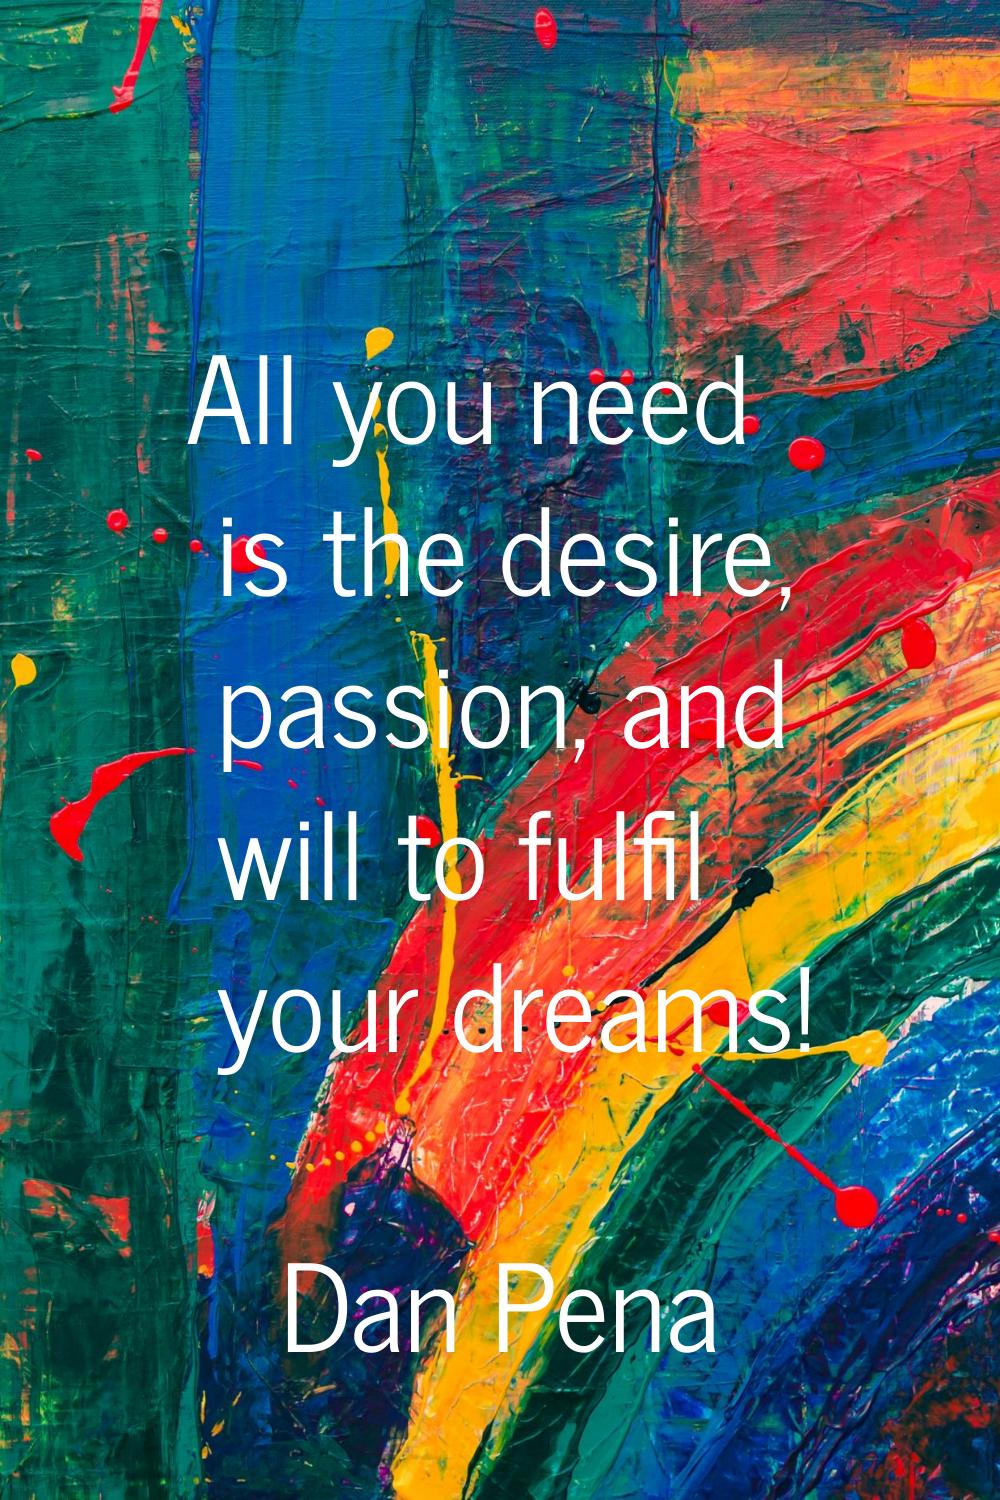 All you need is the desire, passion, and will to fulfil your dreams!